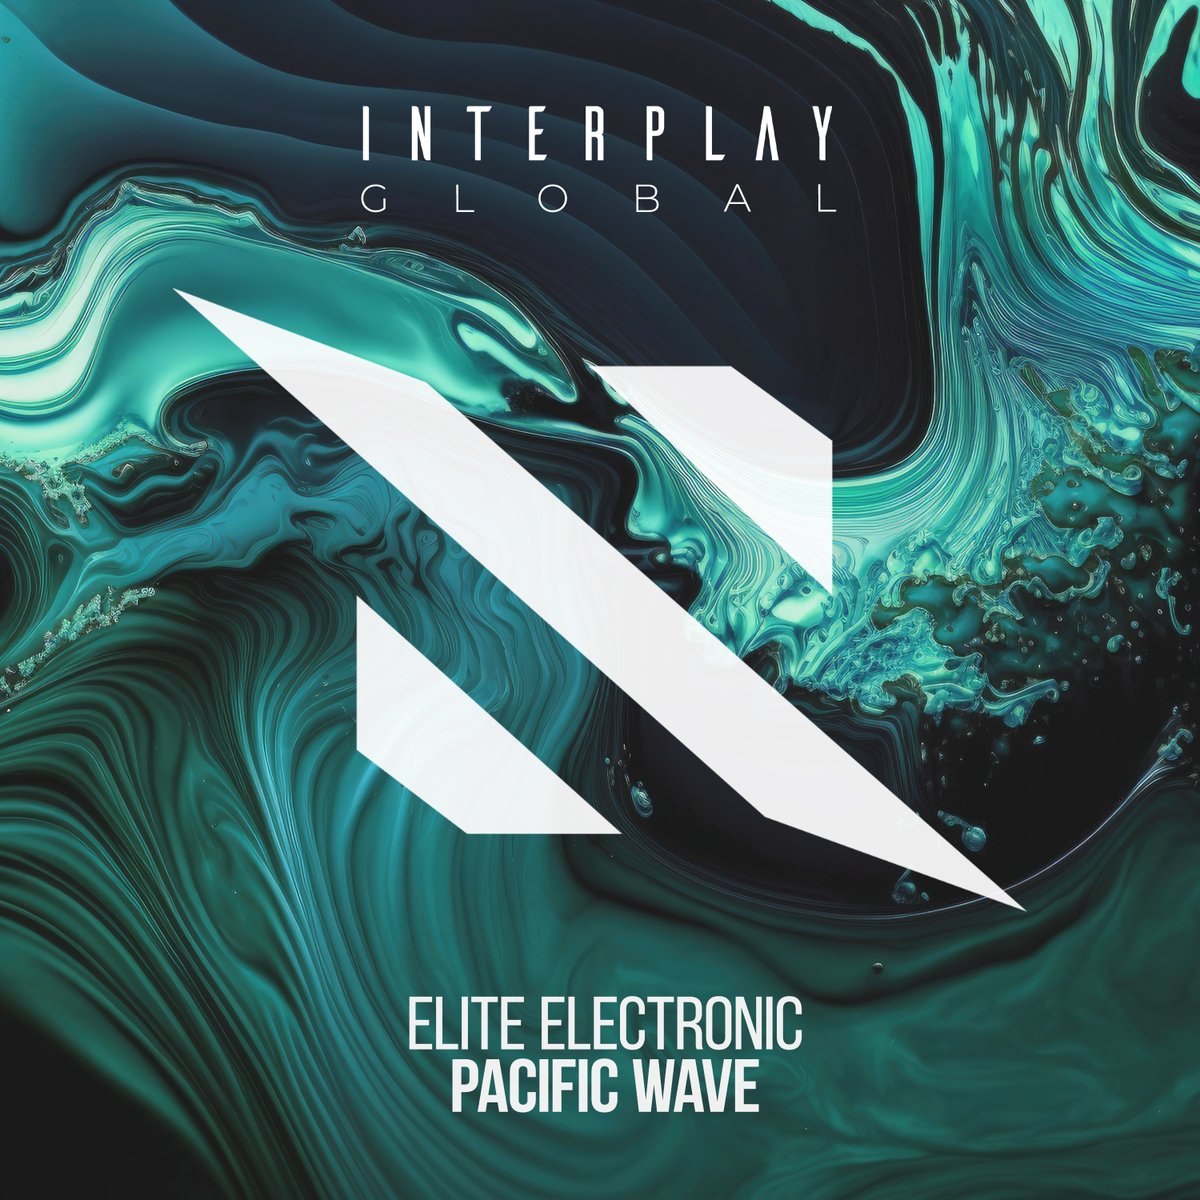 Atmospheric trance single 'Pacific Wave' by Elite Electronic is coming up tomorrow on Interplay Global 🔥 #interplayrec Pre-order: interplay.ffm.to/itpg164